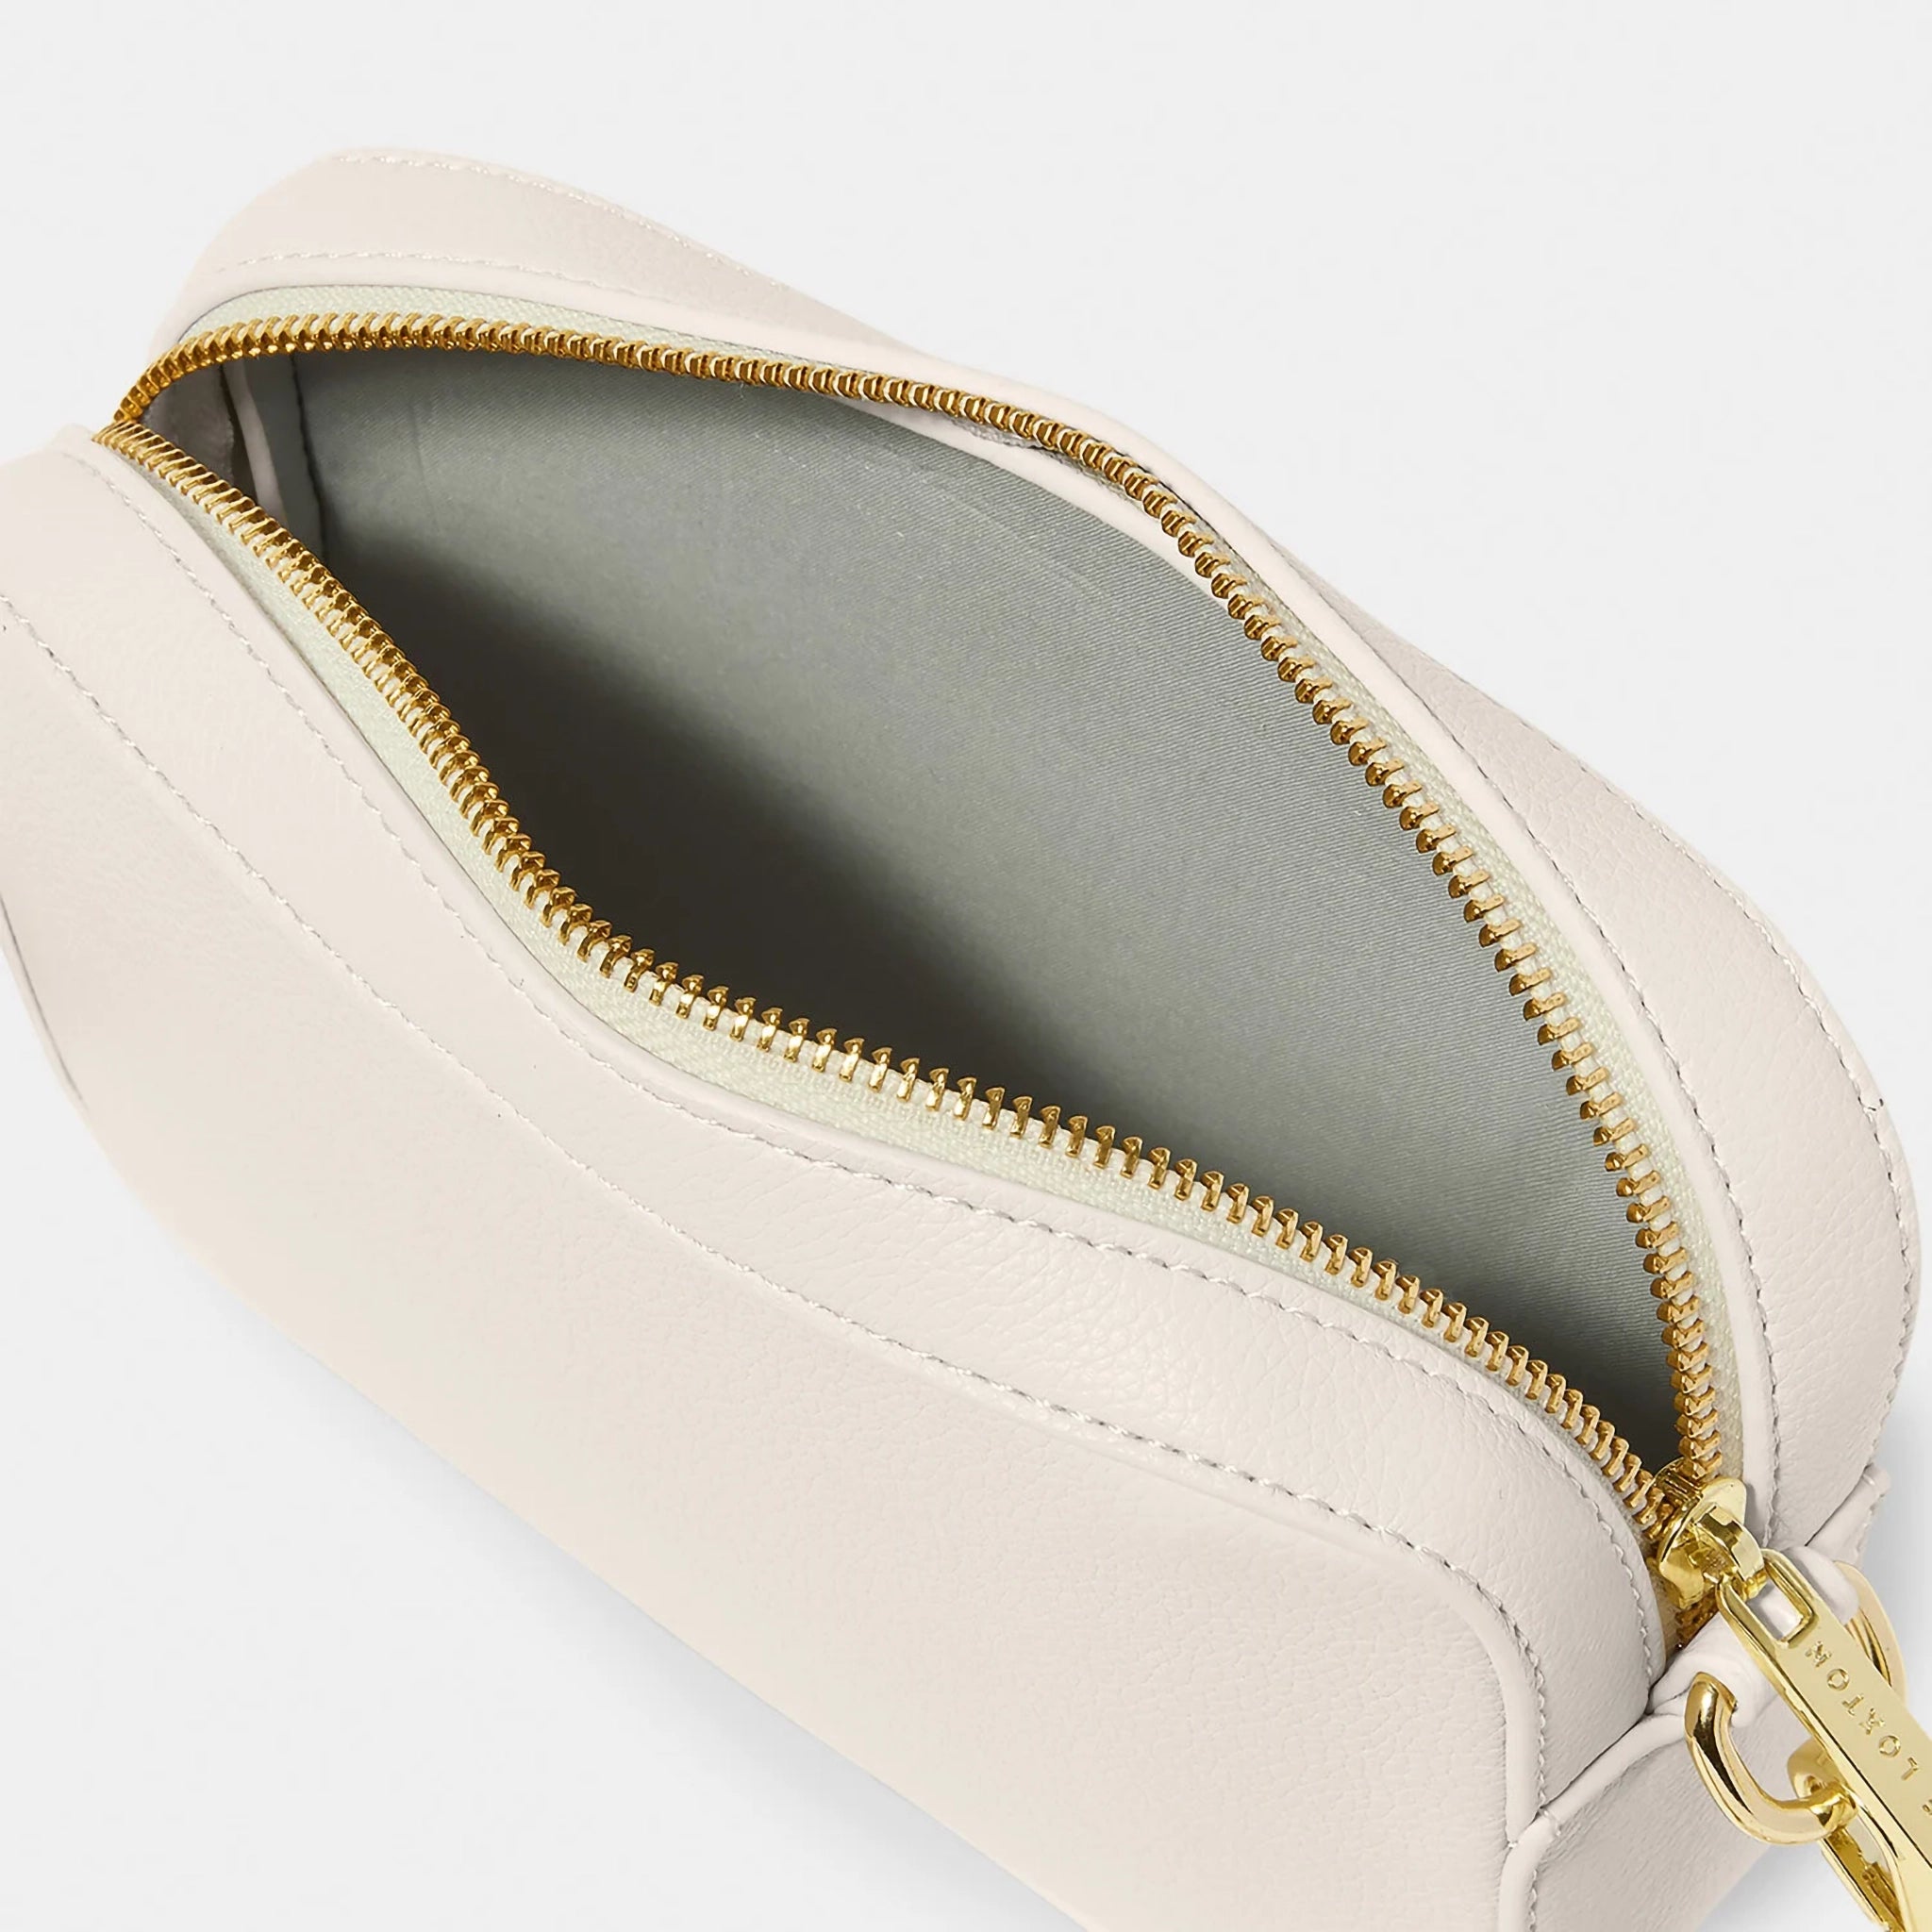 An off-white crossbody bag in a simple box shape with adjustable canvas strap and gold hardware open